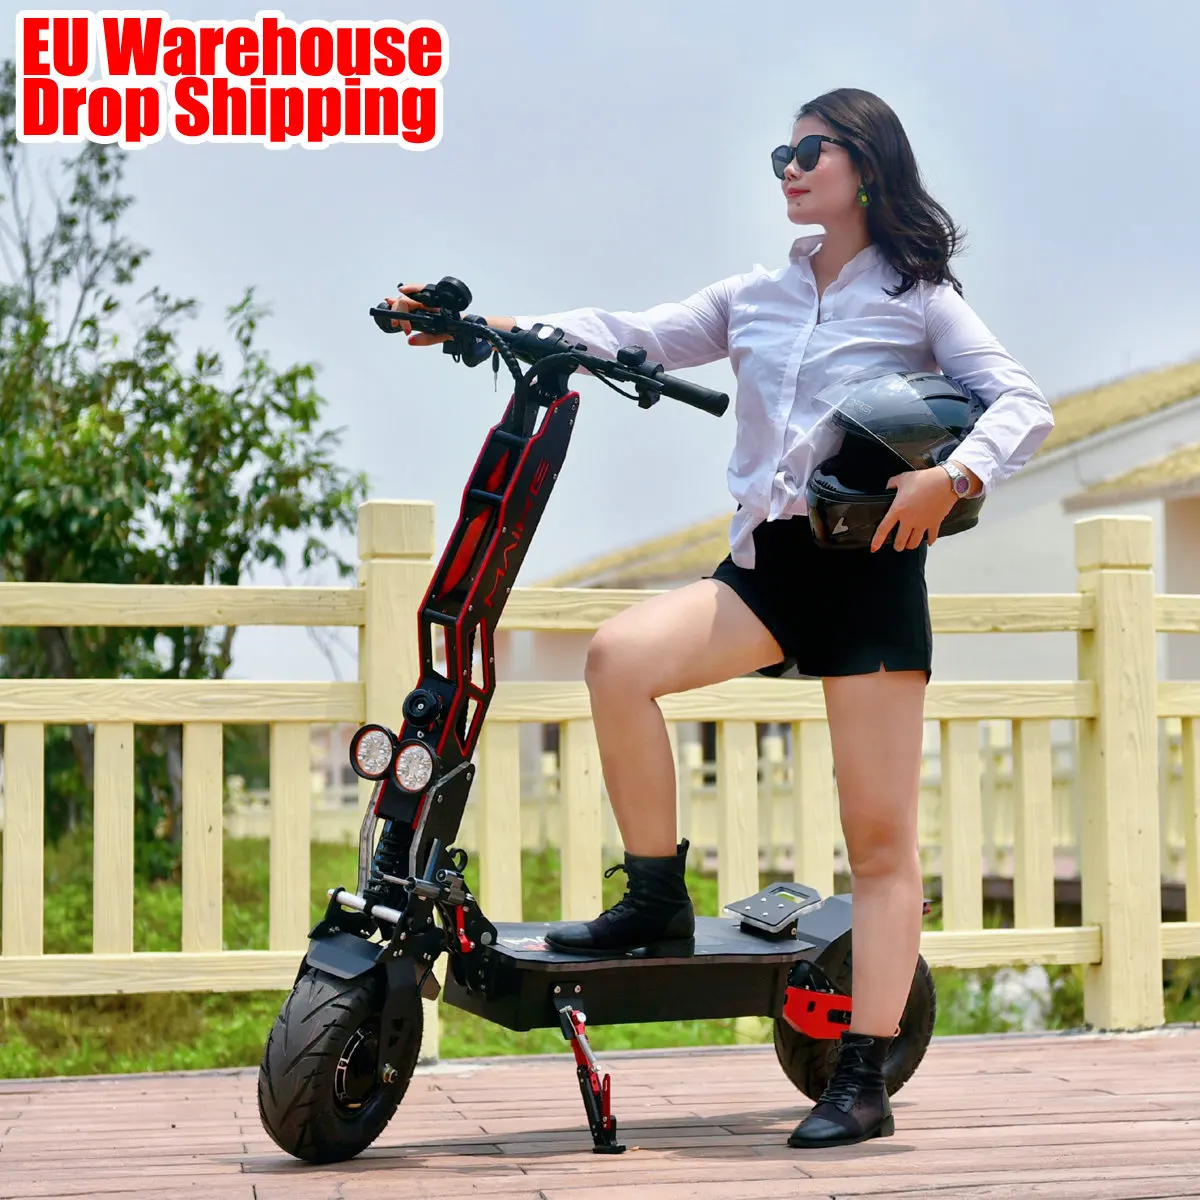 

Free Shipping Maike MKS electric scooter bike 8000w double hub 13 inch electric scooter europe warehouse dripshipping scooter